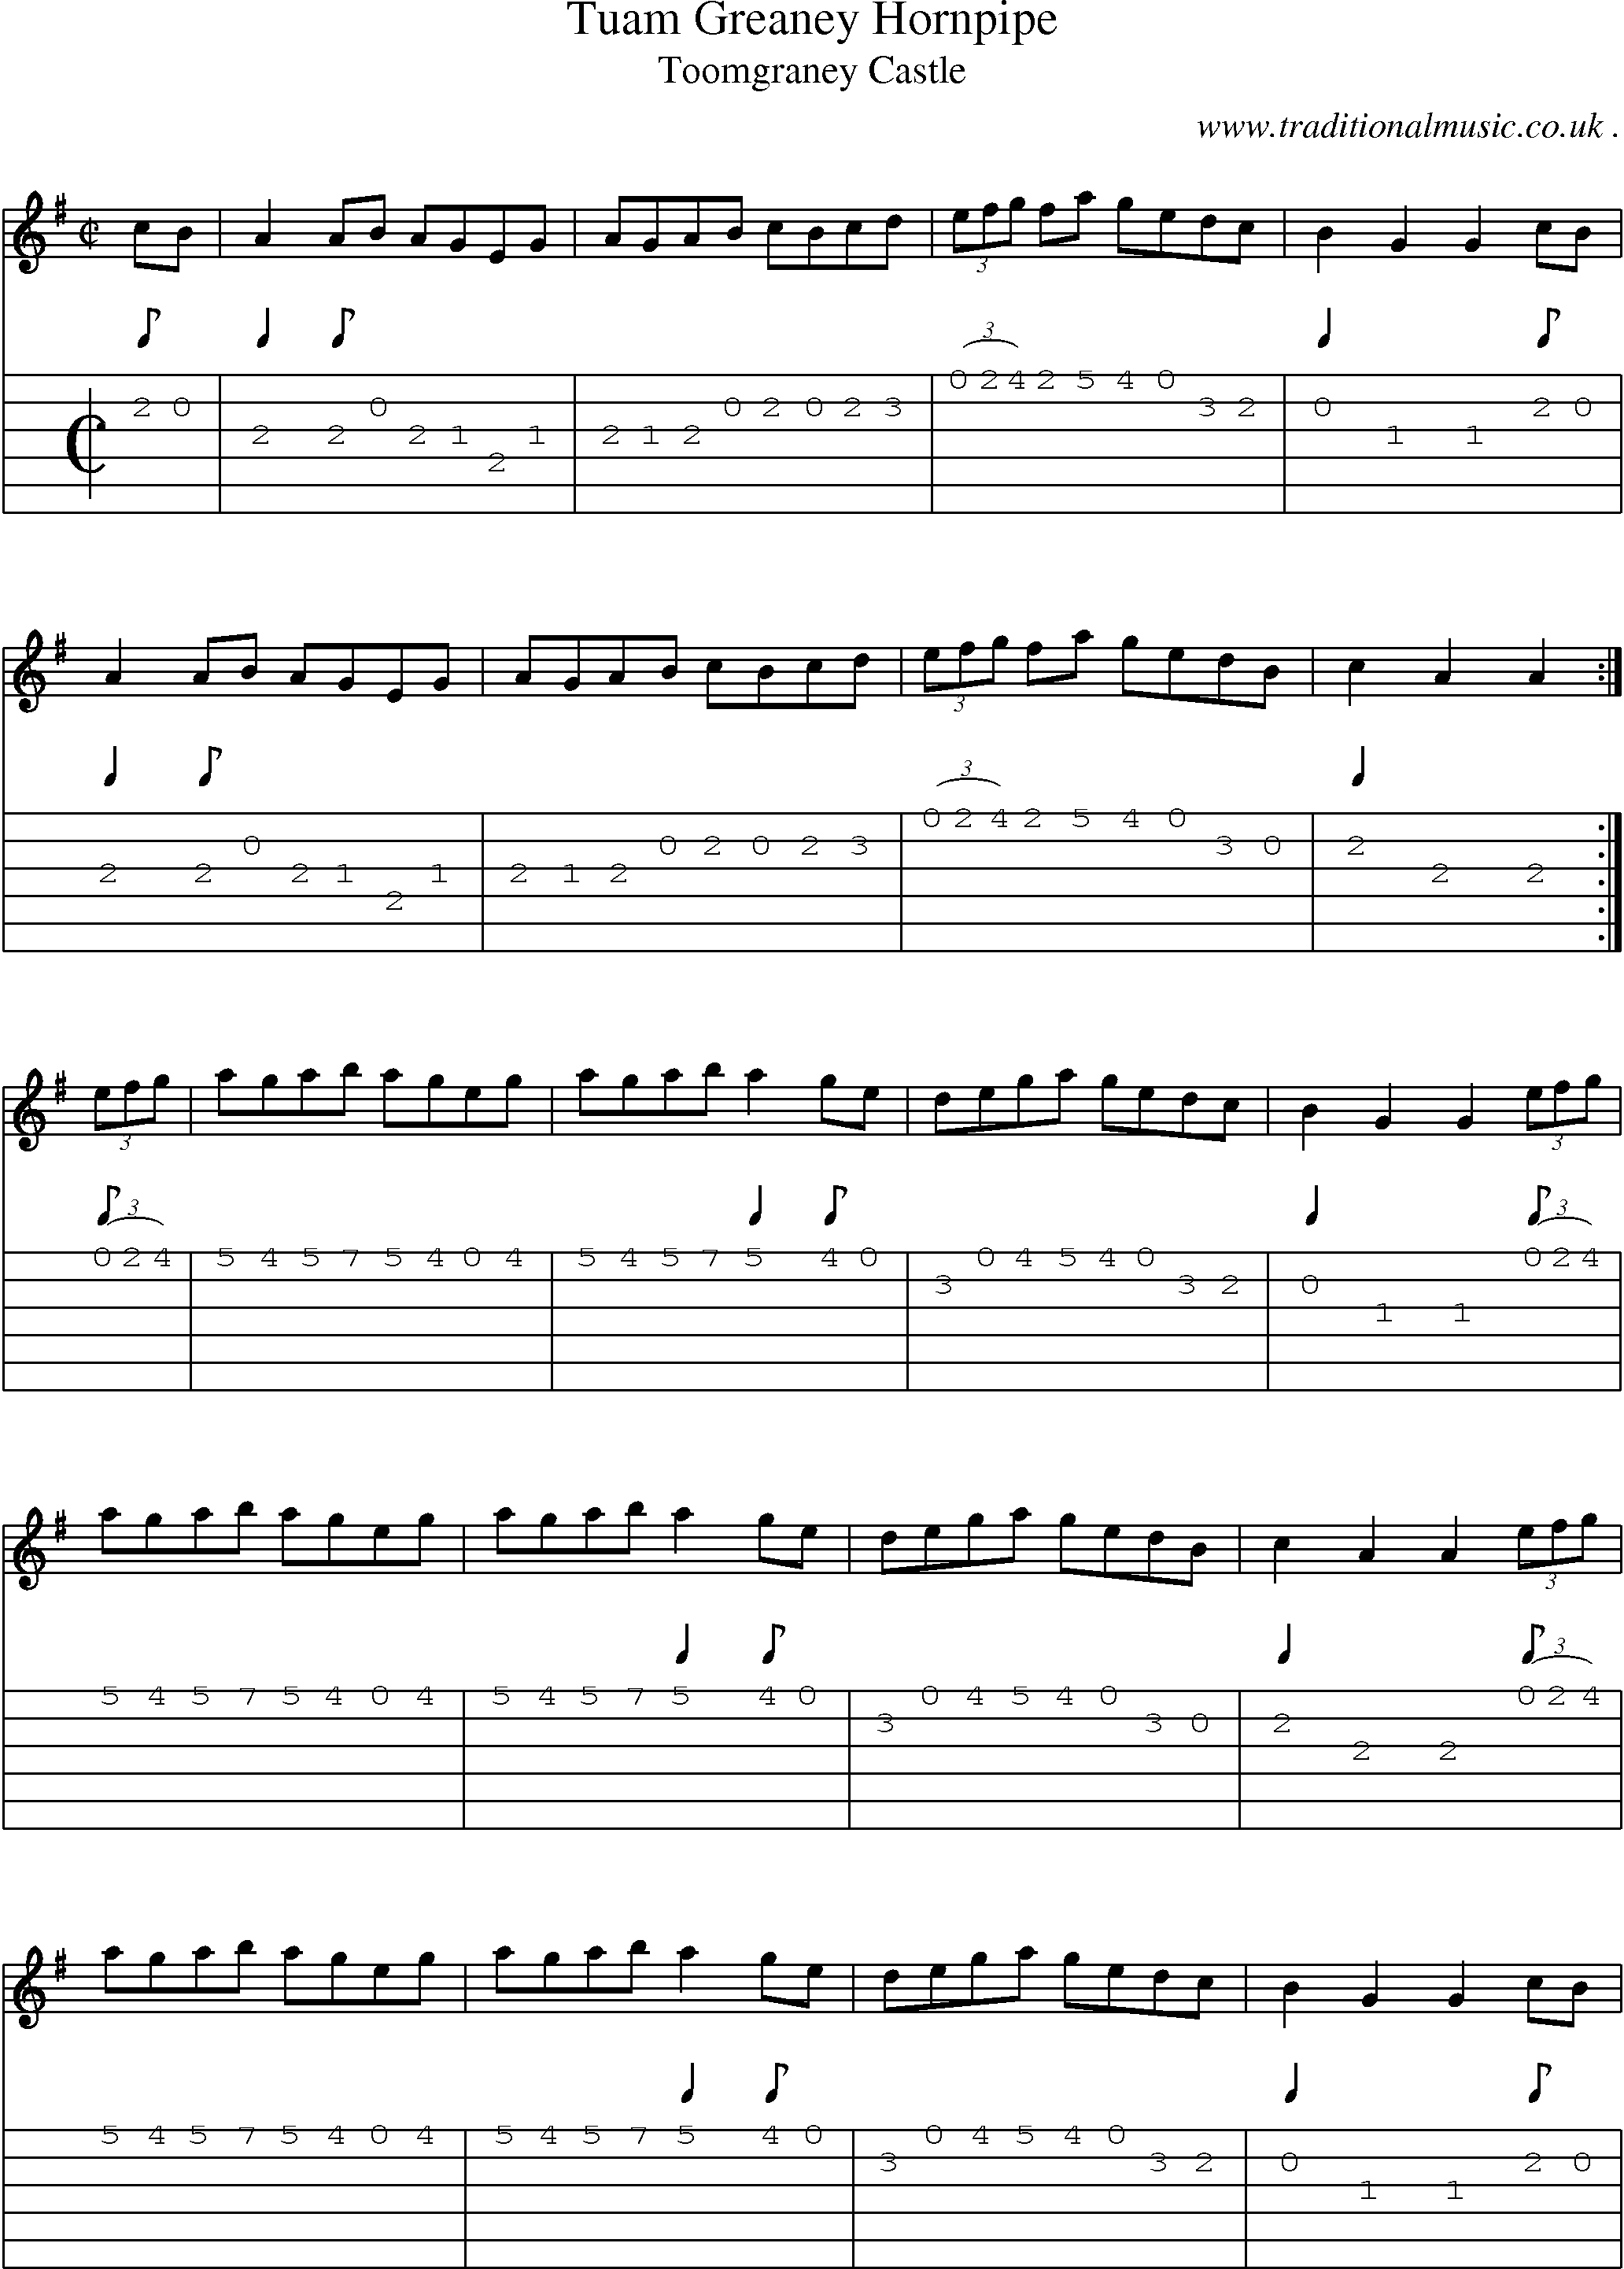 Sheet-Music and Guitar Tabs for Tuam Greaney Hornpipe